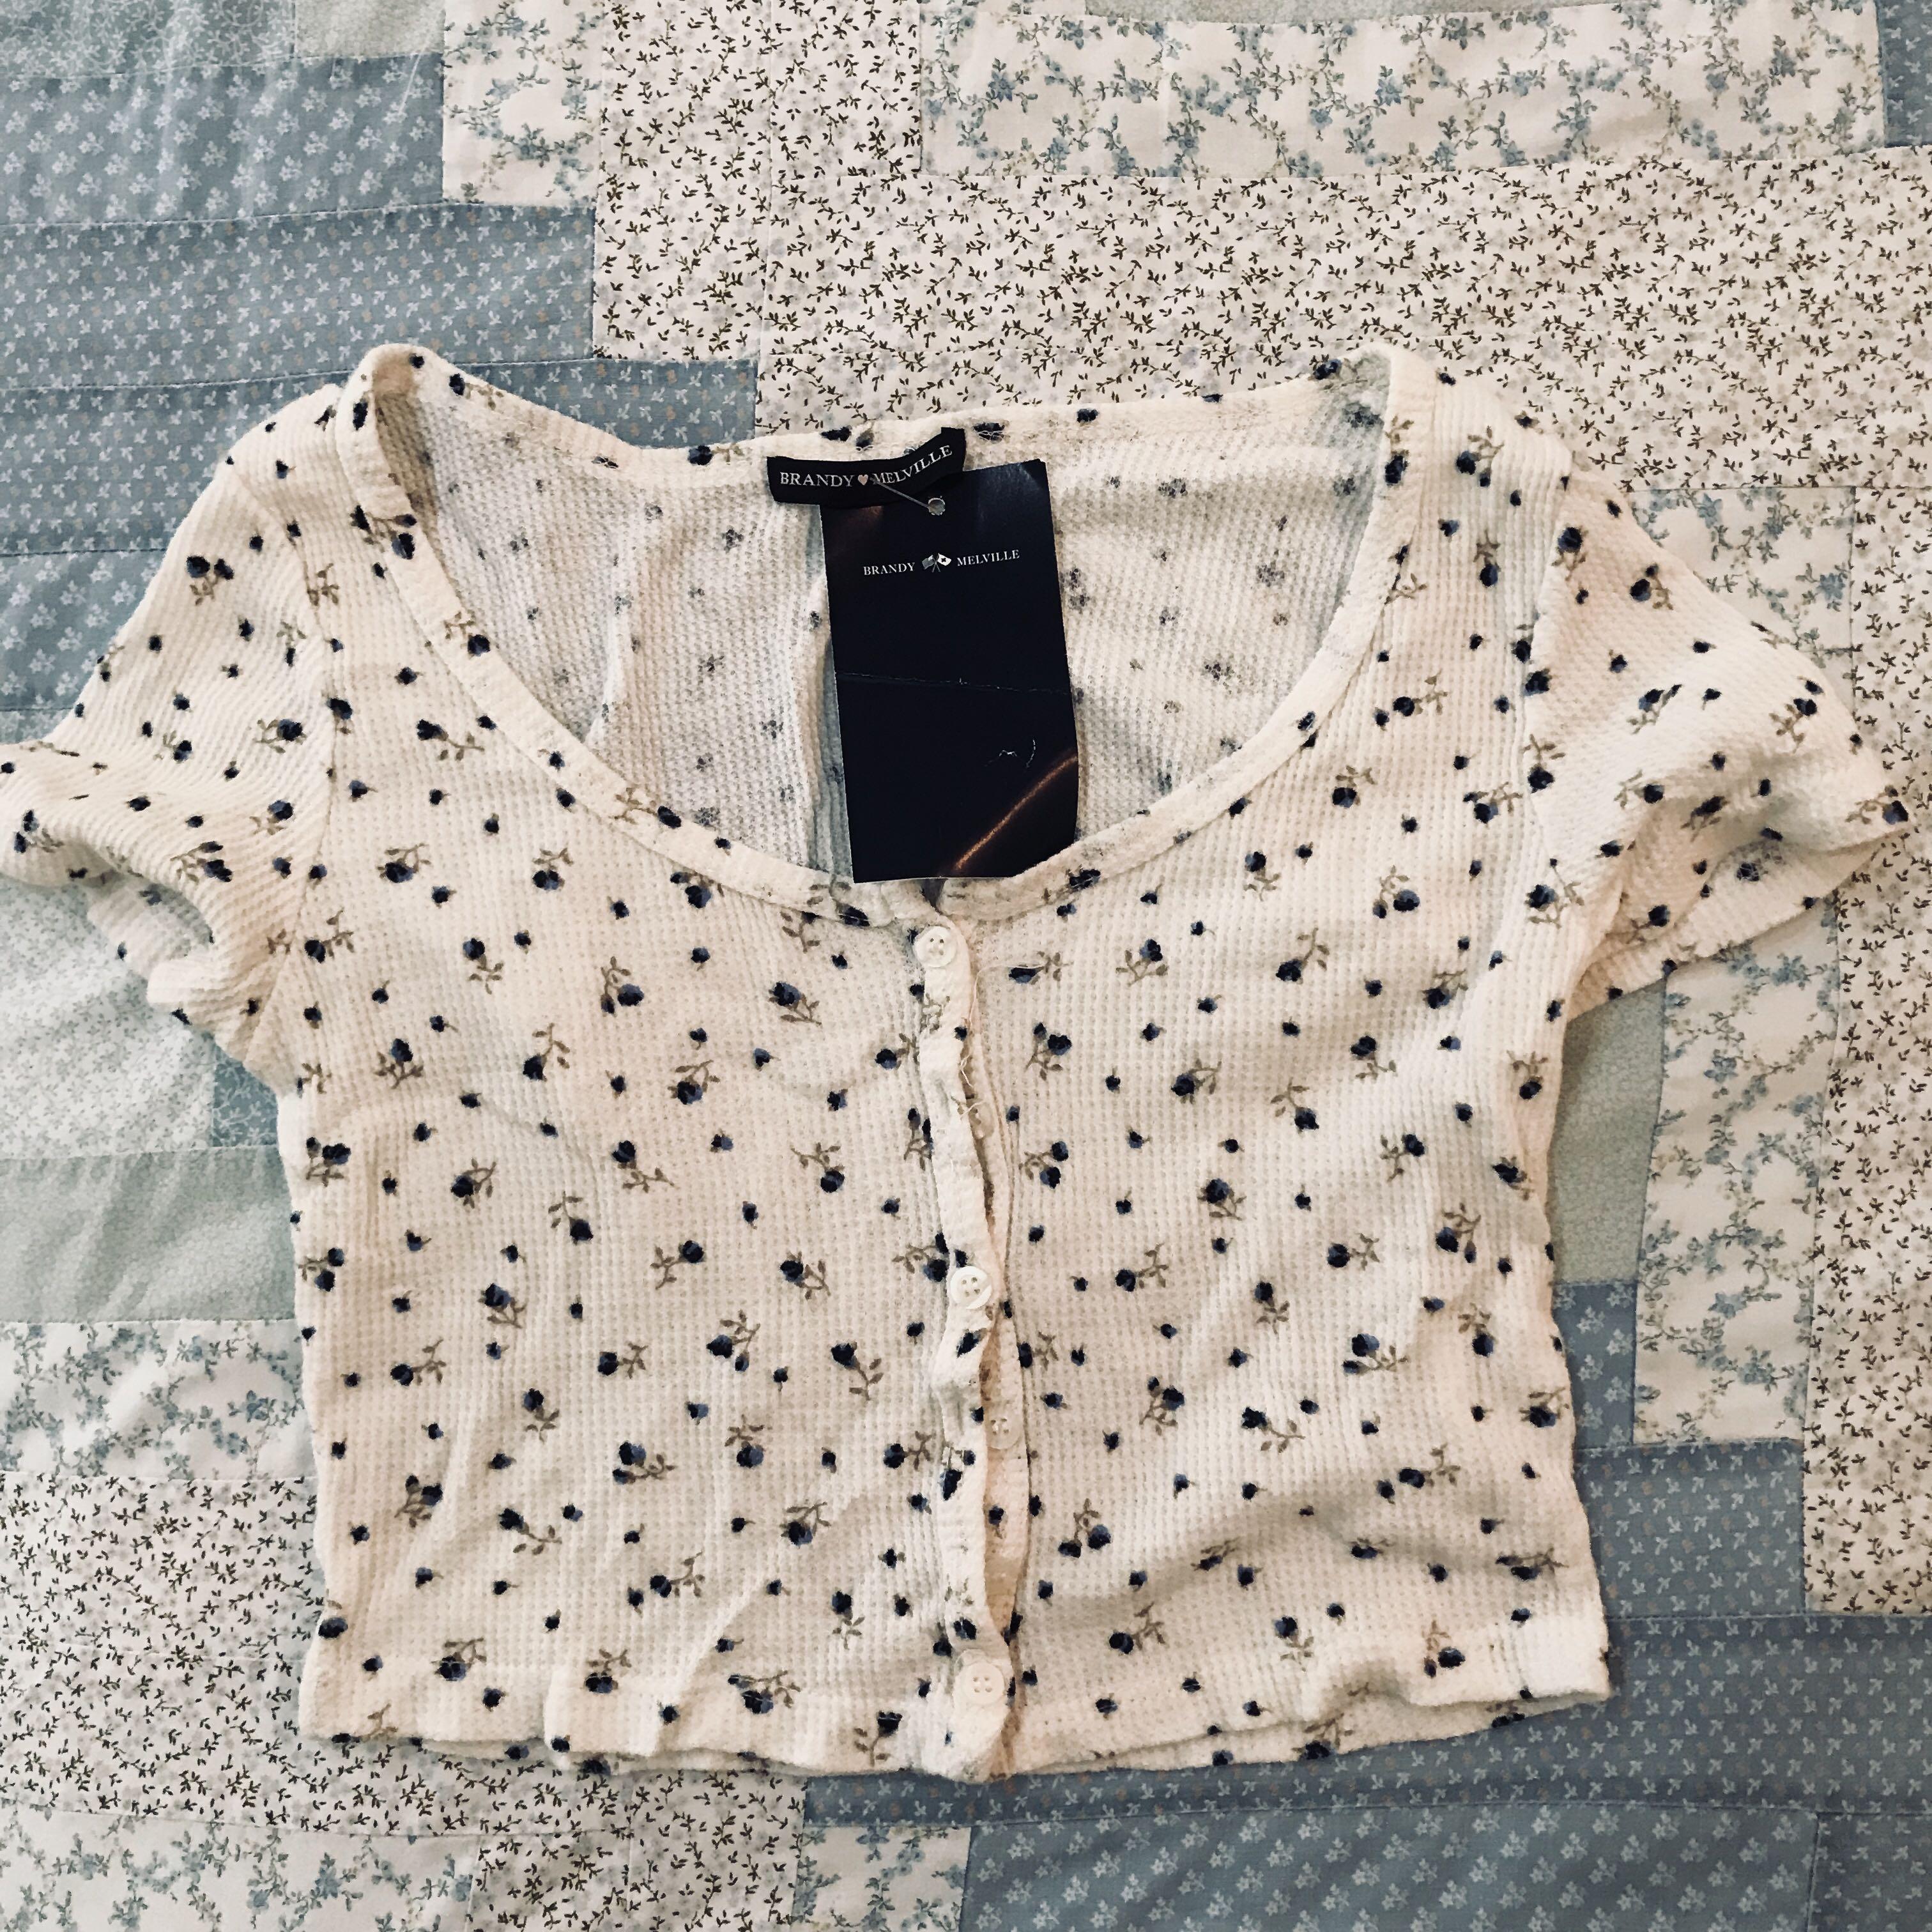 Bnwt Brandy Melville White Blue Rose Floral Button Up Zelly Thermal Crop Top Authentic Bm Women S Fashion Tops Other Tops On Carousell